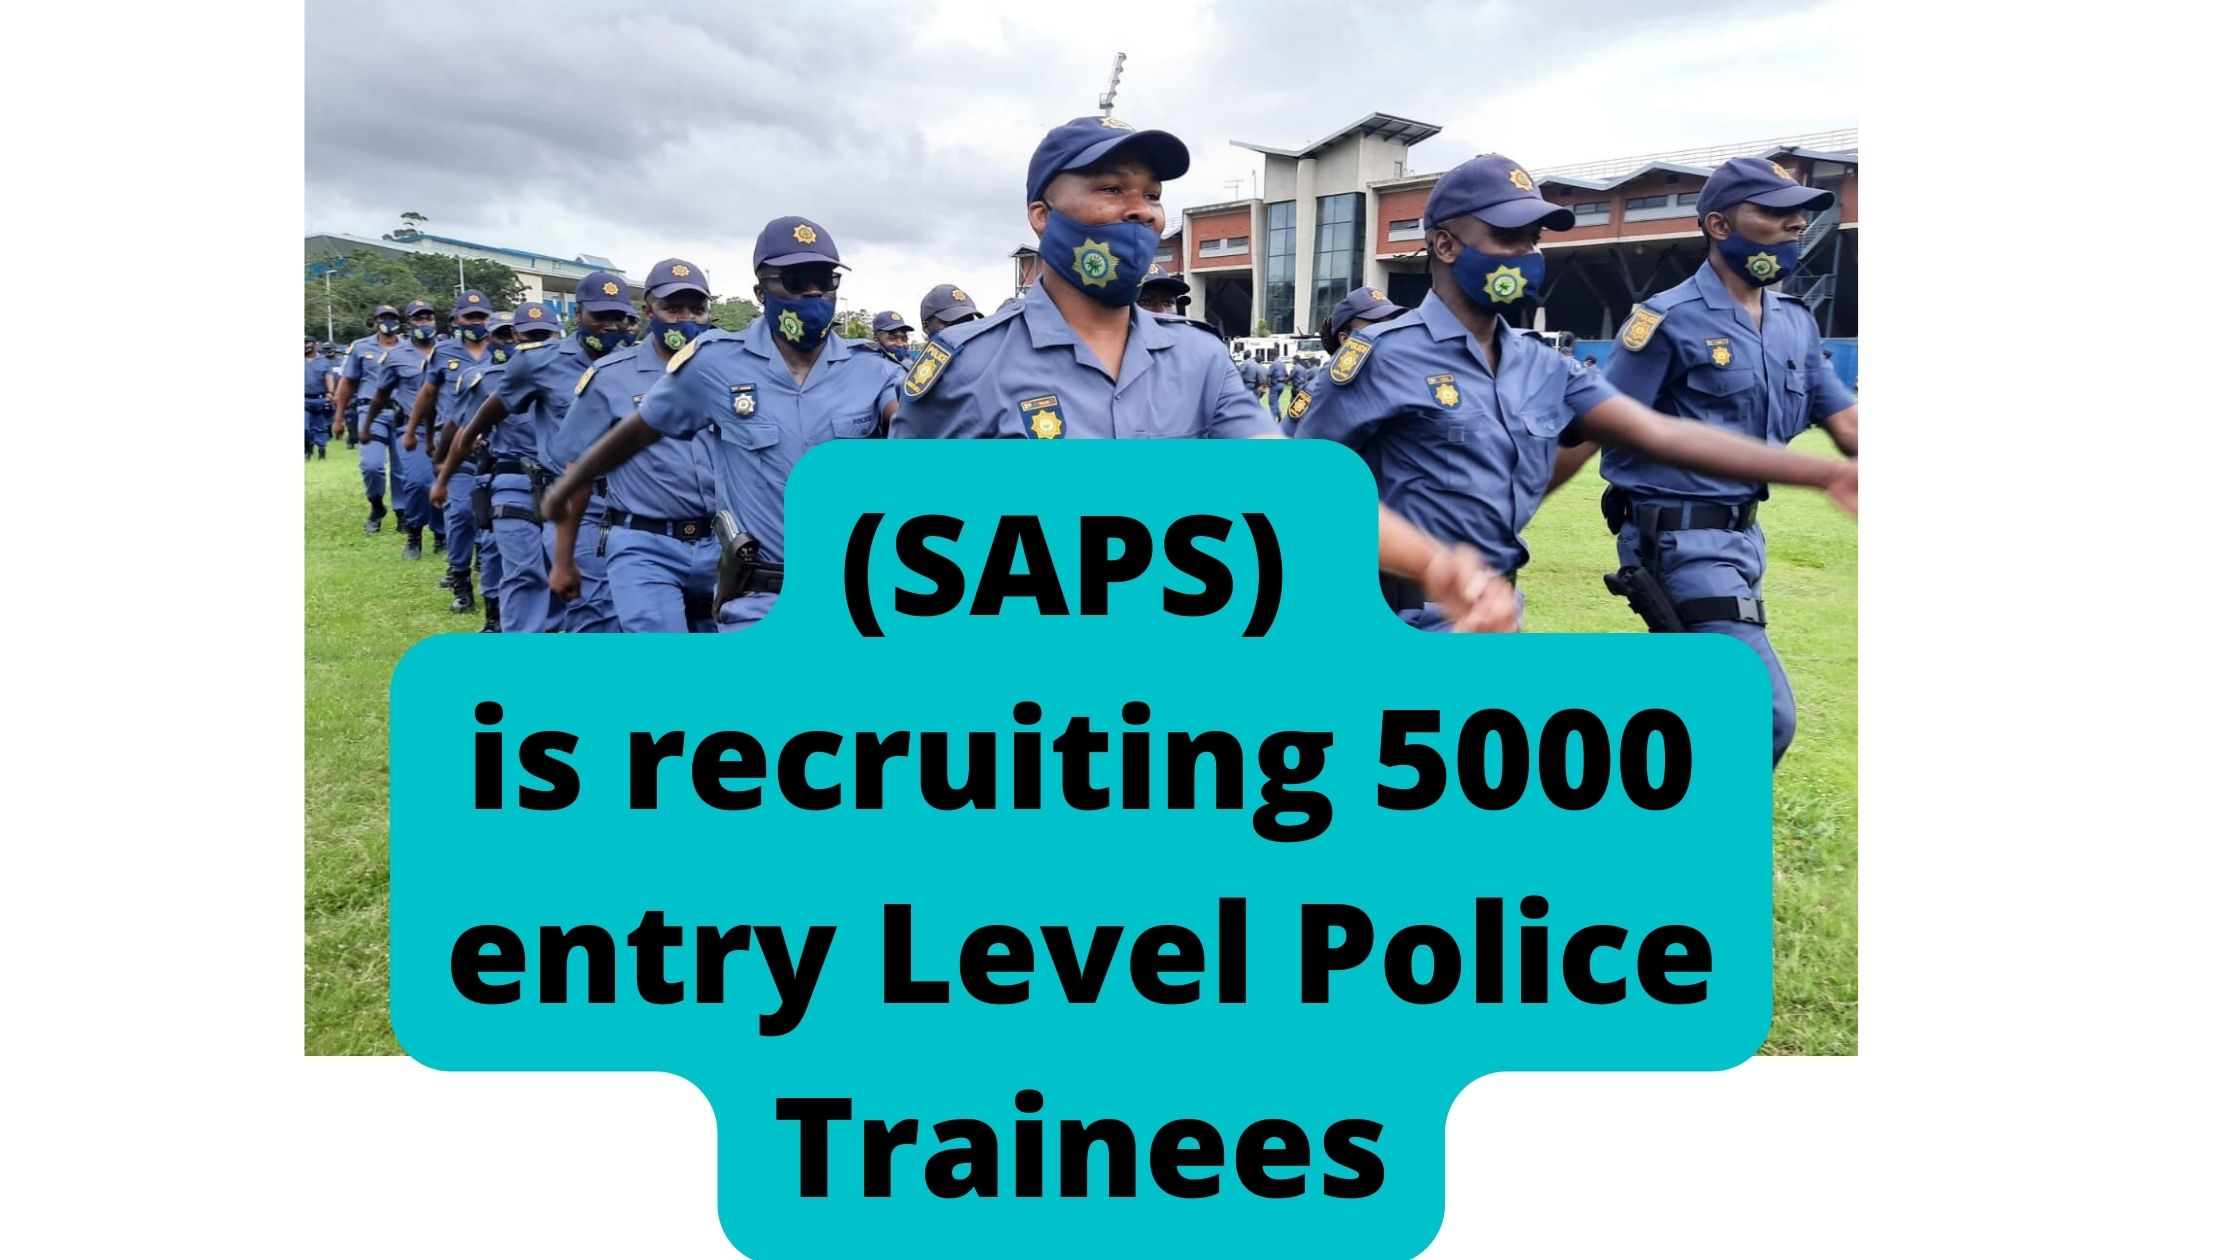 (SAPS) is recruiting 5000 entry Level Police Trainees